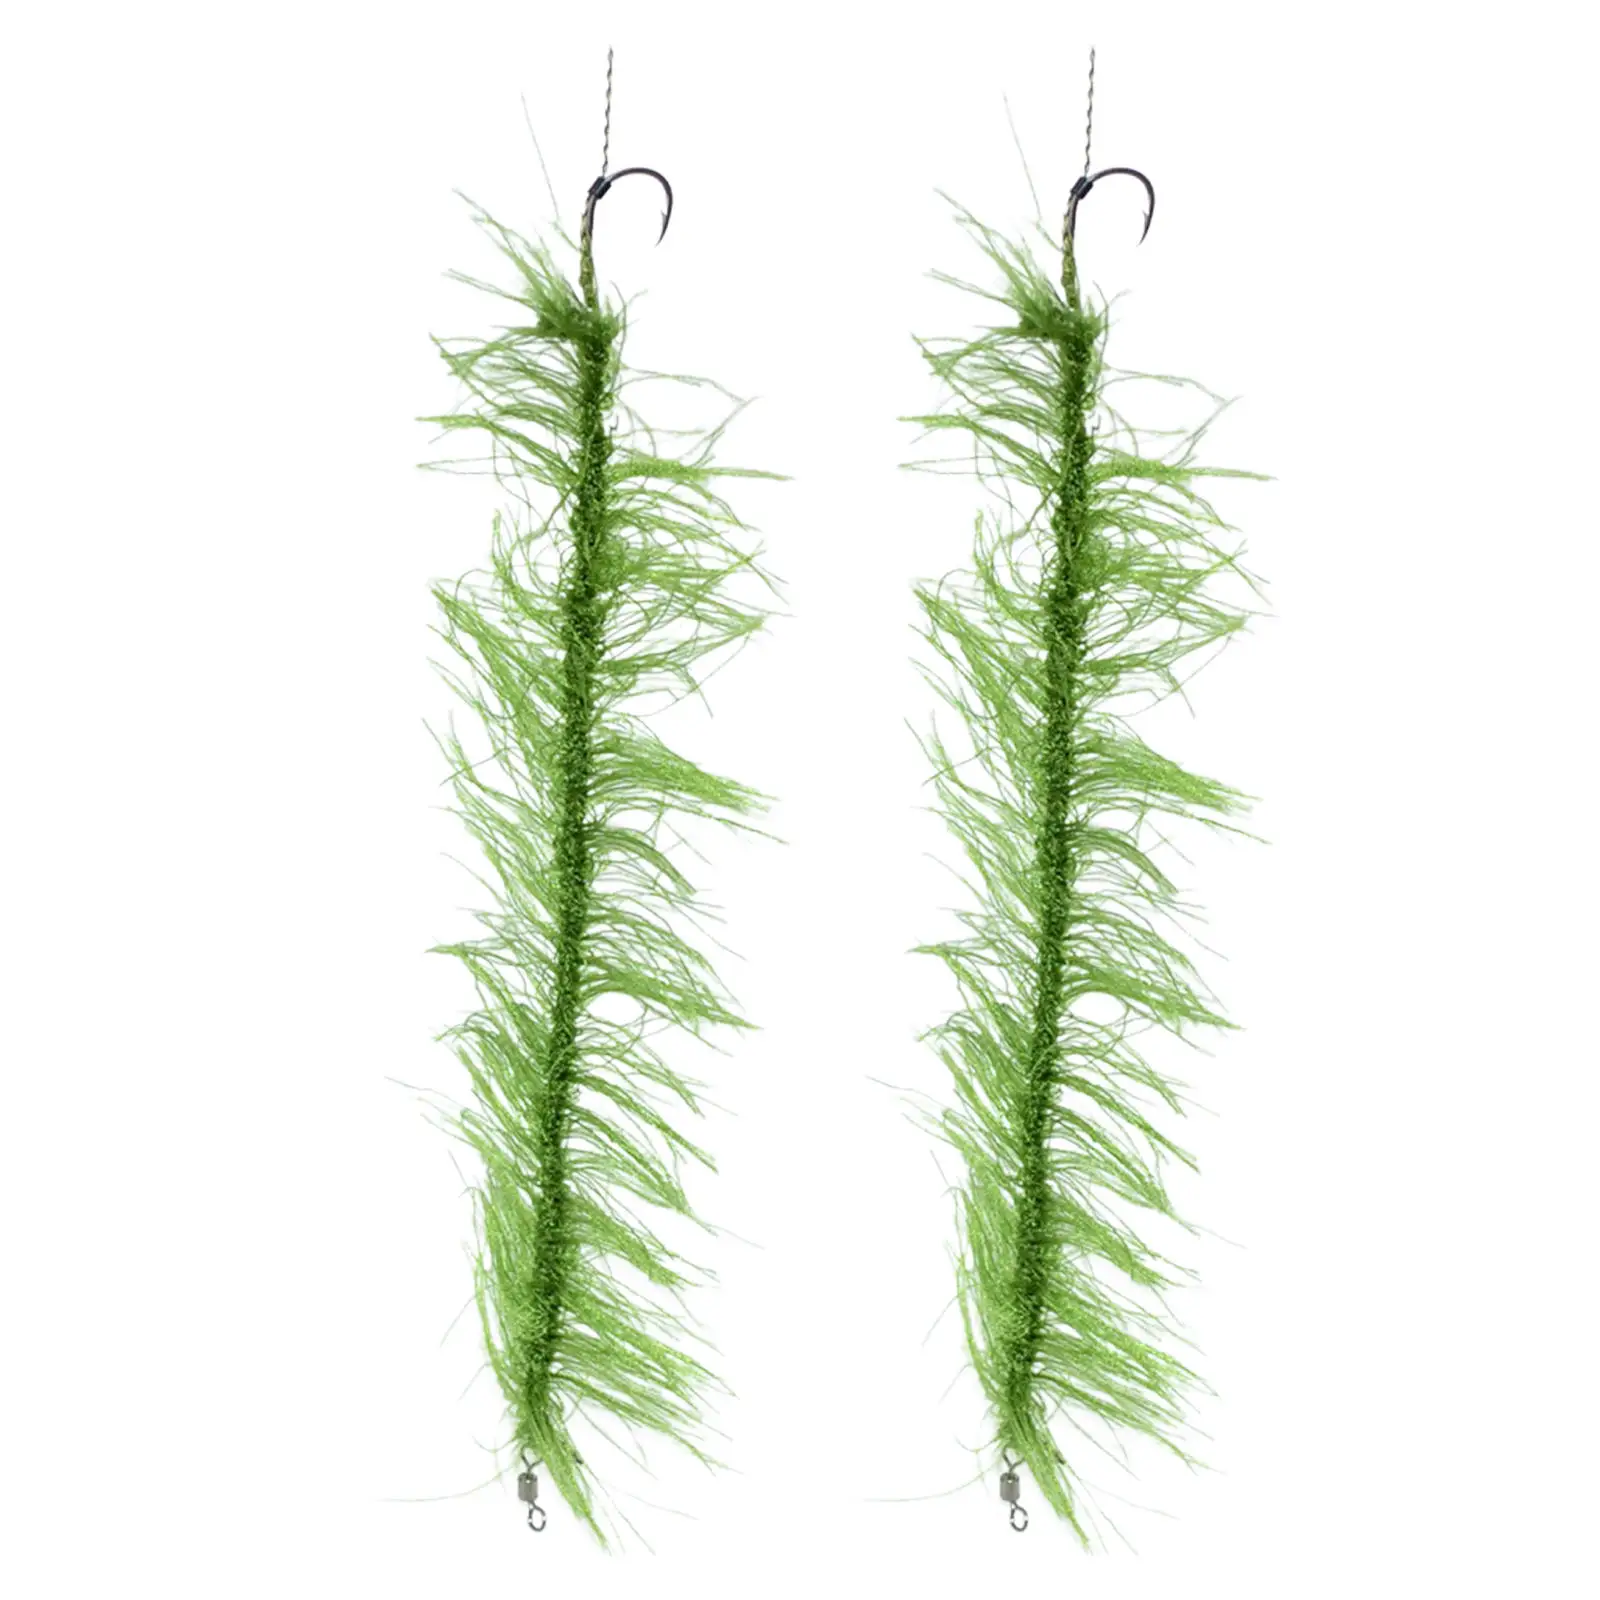 2x Carp Fishing 20cm Made Fish Hair Rigs Terminal Tackle with Hook and Weed Line Fishing Tackle Accessories